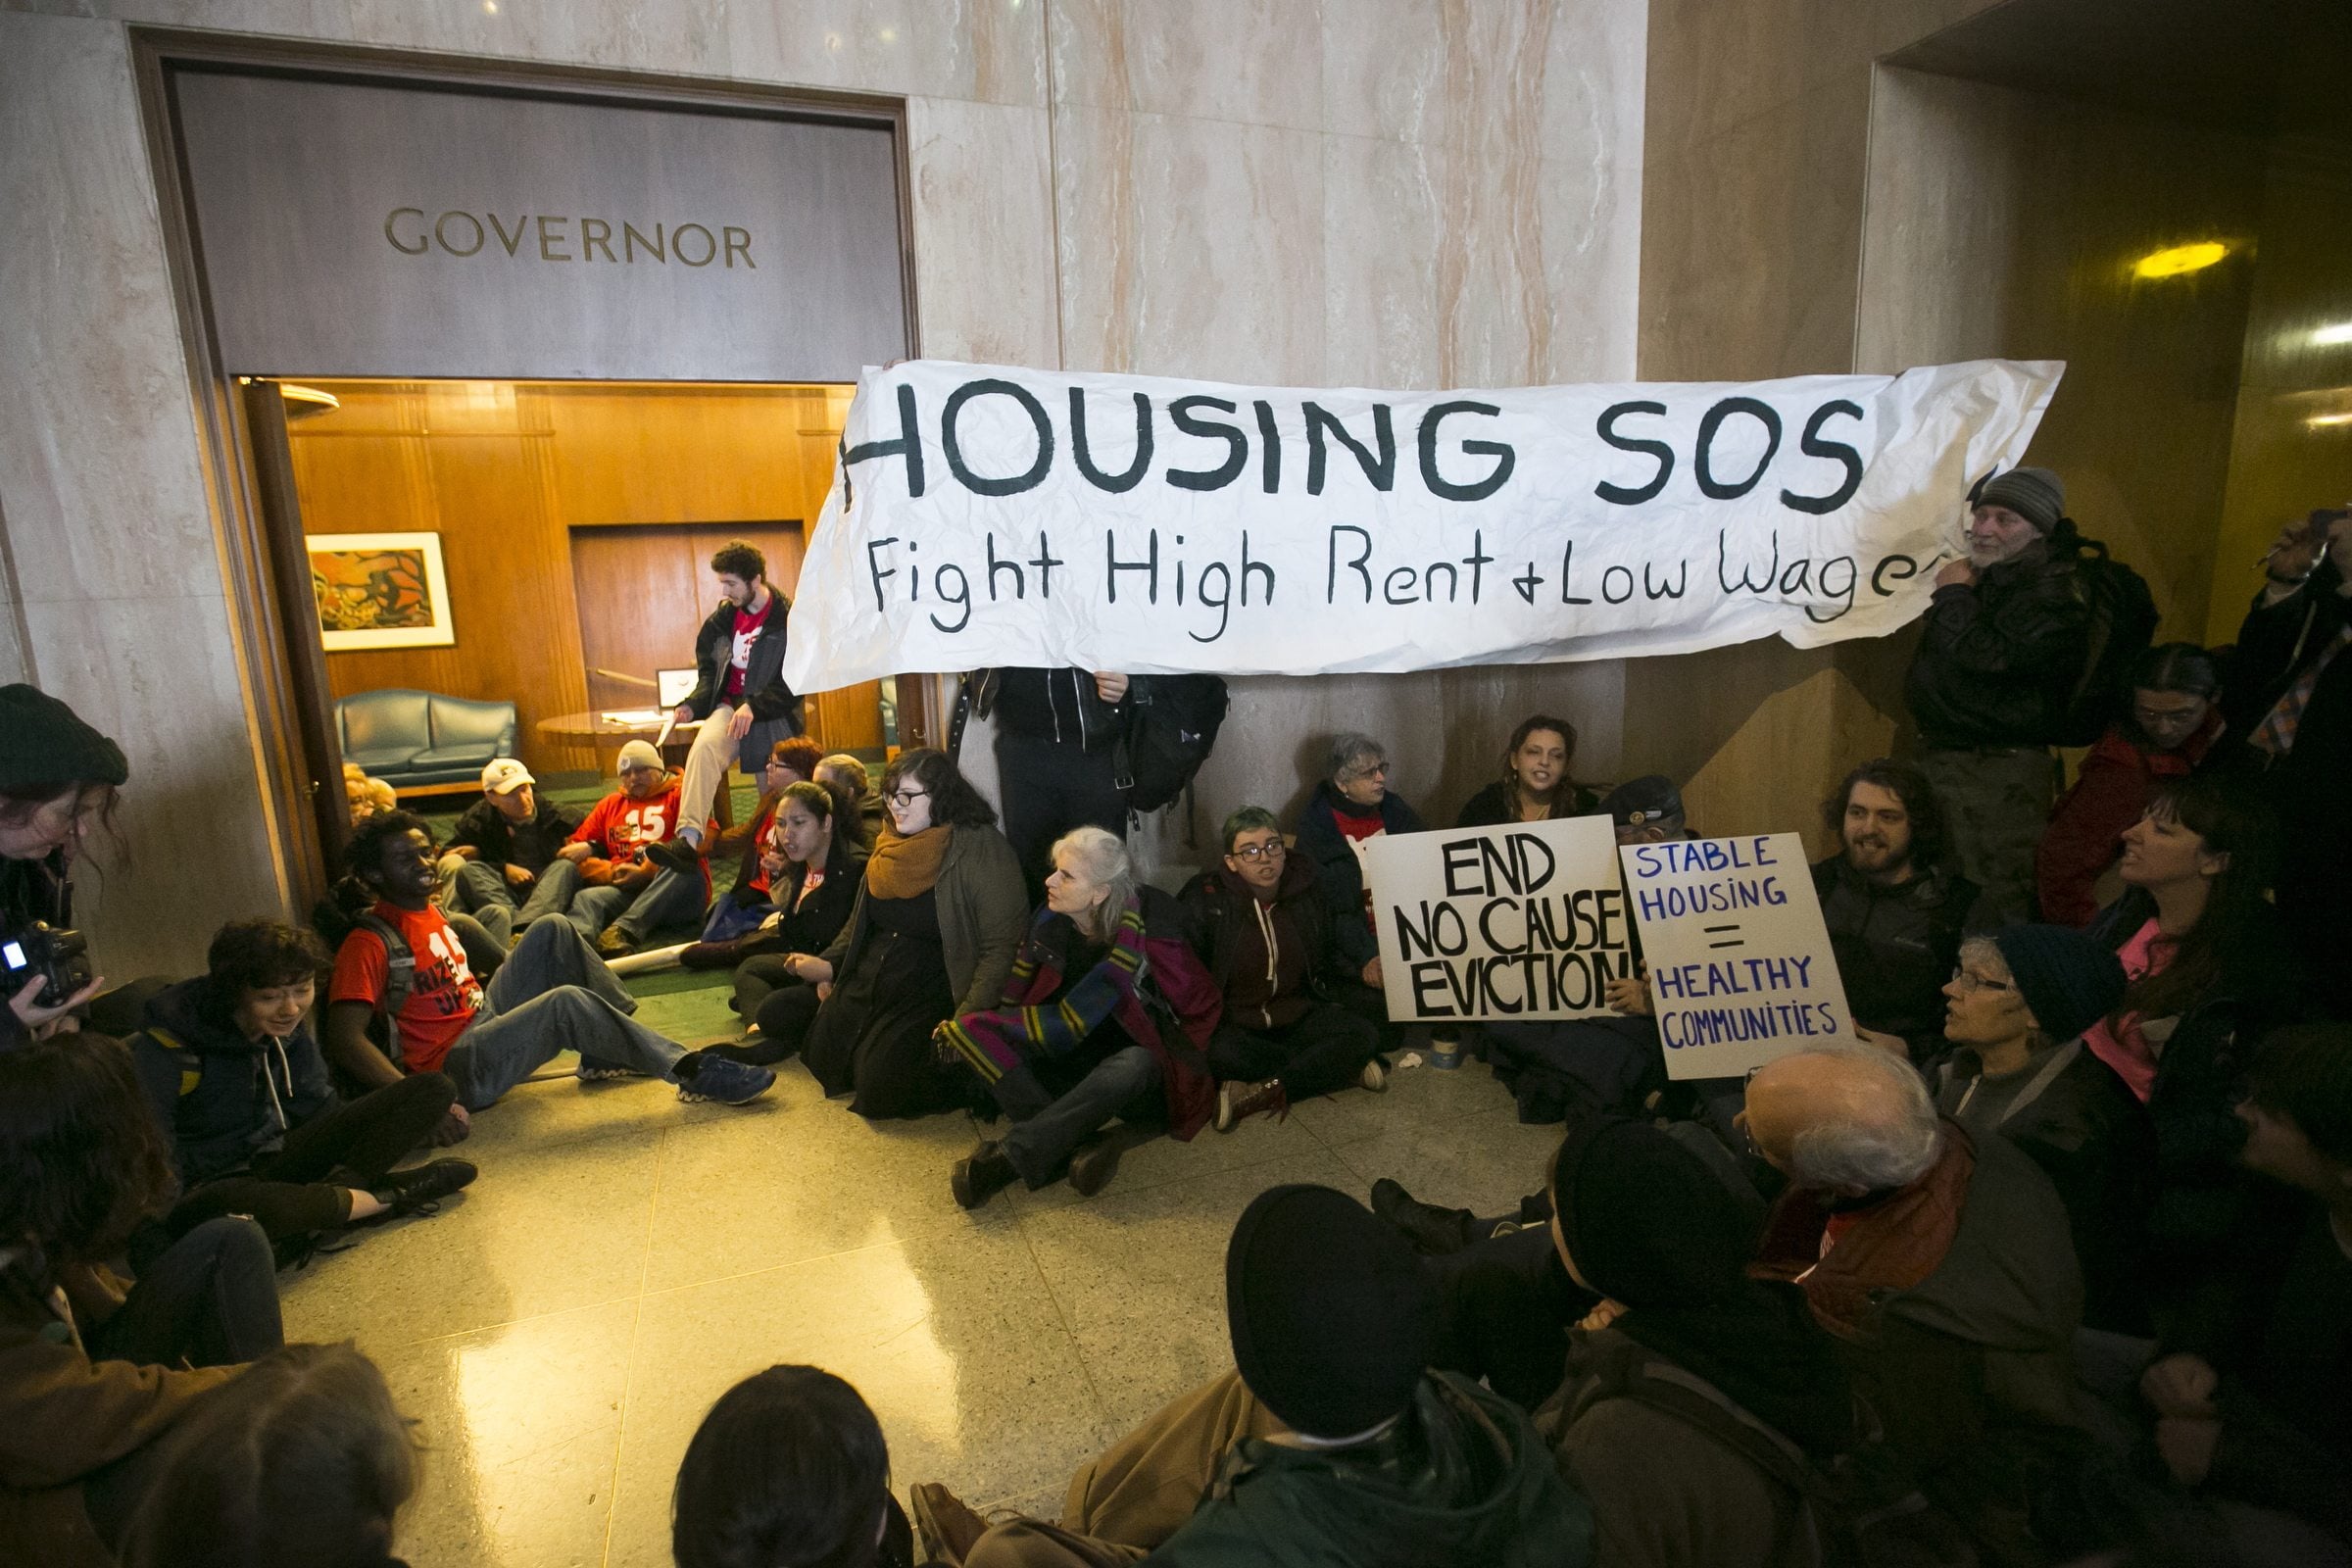 Demonstrators call for a fight against high rents and low wages as they stage a sit-in Thursday at the doorway of the governor&#039;s office at the Capitol in Salem, Ore. The protesters began their chants minutes after the House began hearing a bill to increase the minimum wage. (Molly J.